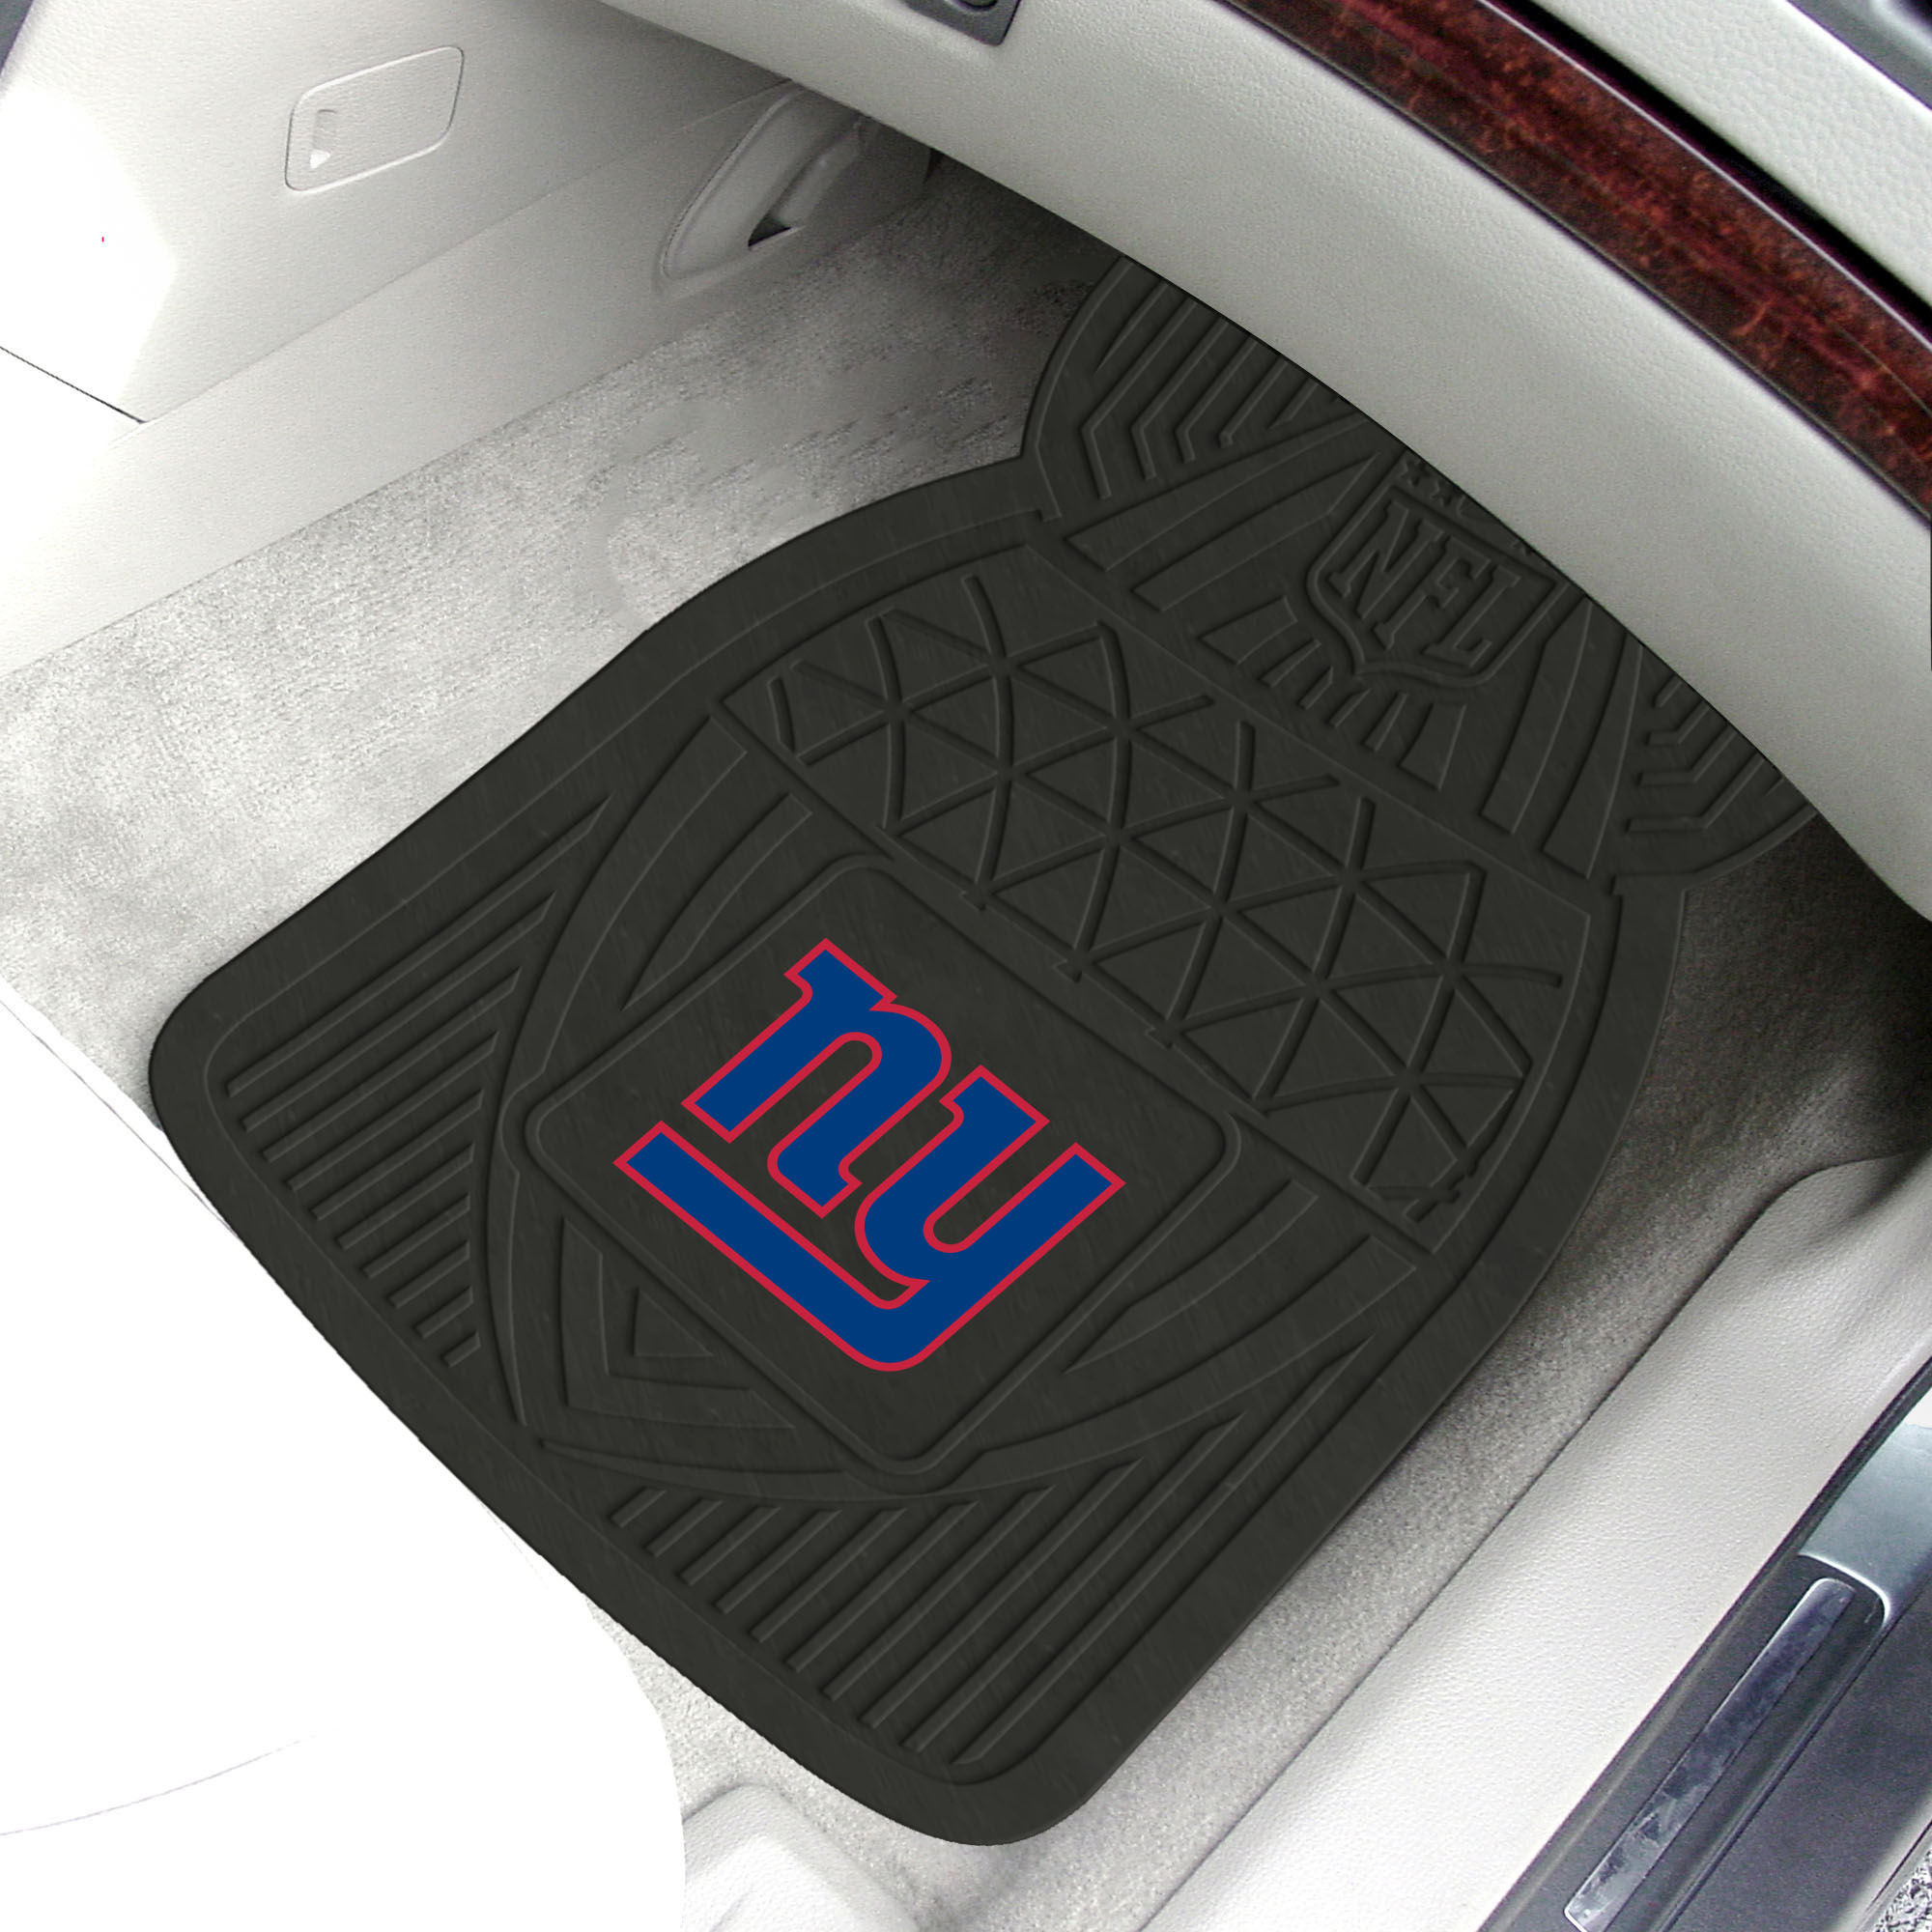 NFL 2-Piece Heavy-Duty Vinyl Car Mat Set, New York Giants - SPORTS LICENSING SOLUTIONS - image 2 of 2